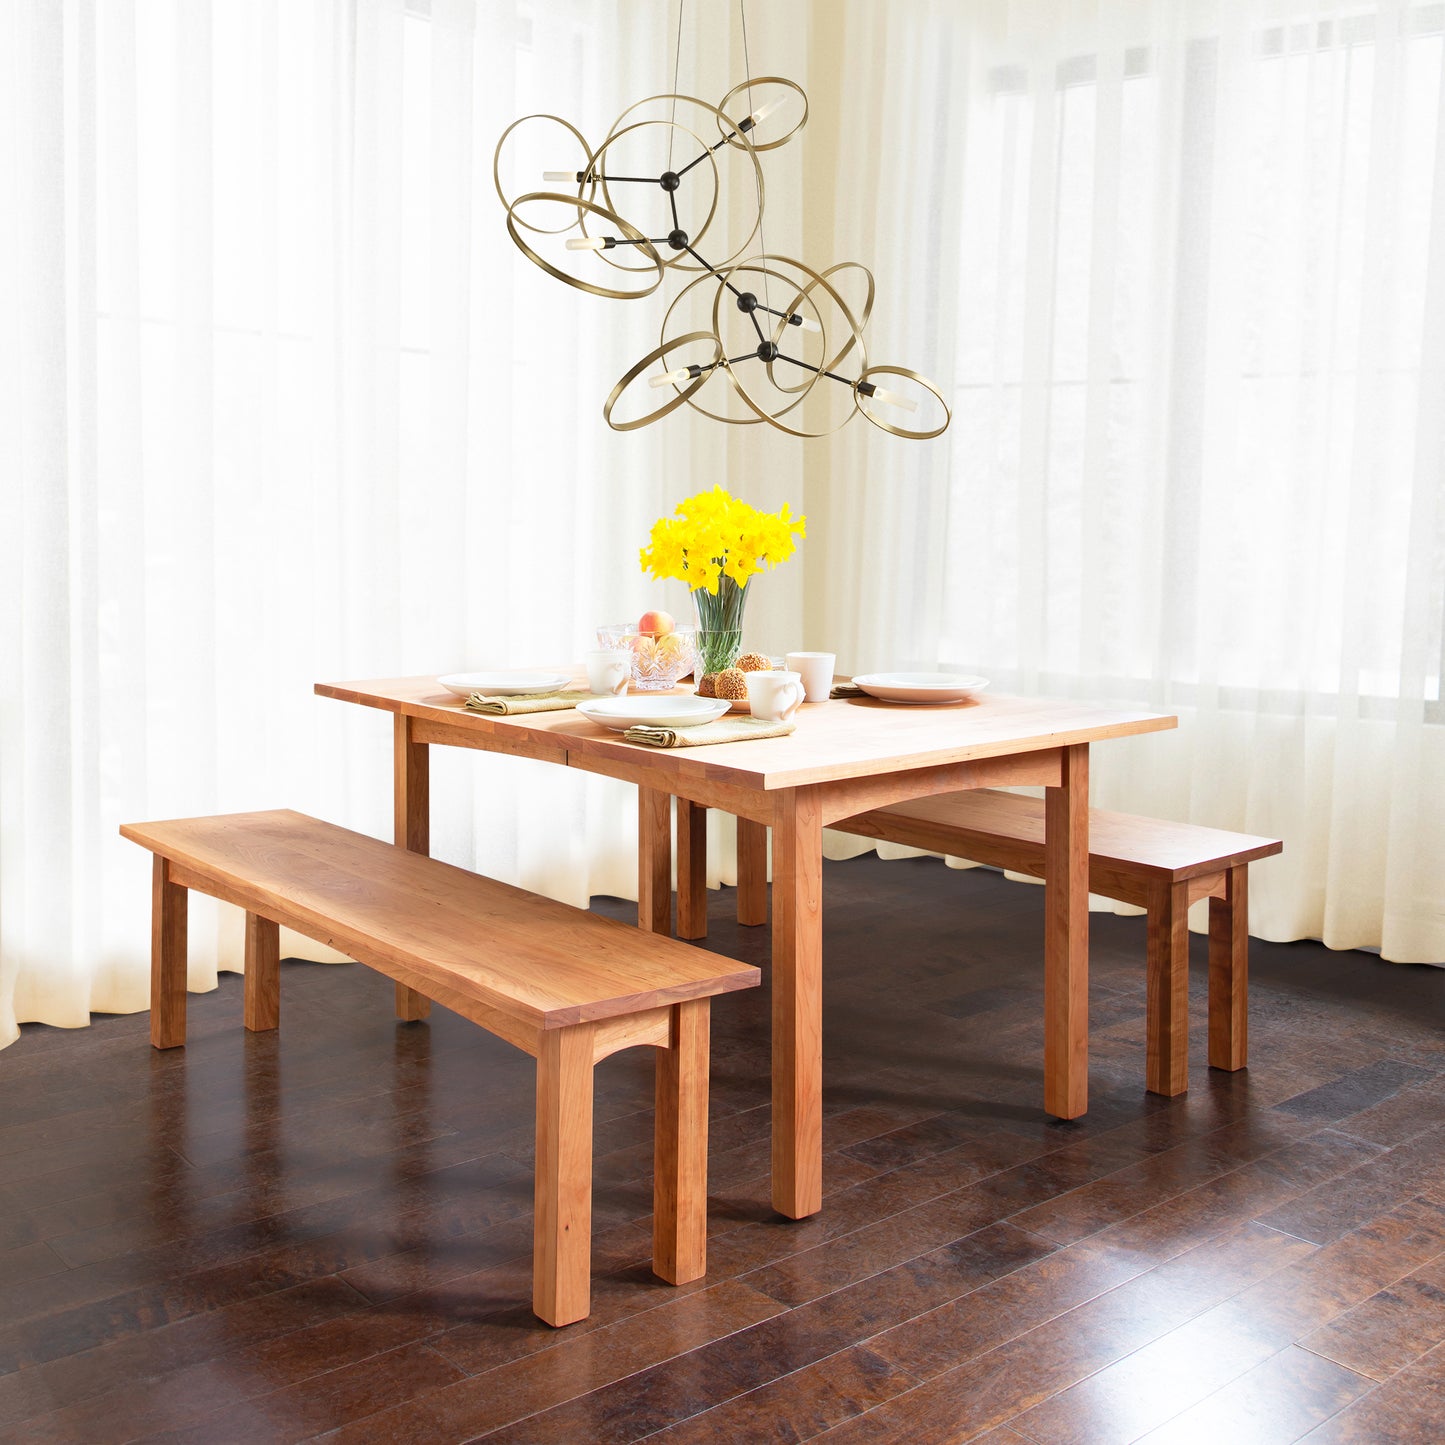 A wooden dining table set from the Vermont Furniture Designs Burlington Shaker Bench Collection, with two Vermont Furniture Designs Burlington Shaker Benches, place settings for two, and a bouquet of yellow flowers under a modern chandelier in a room with